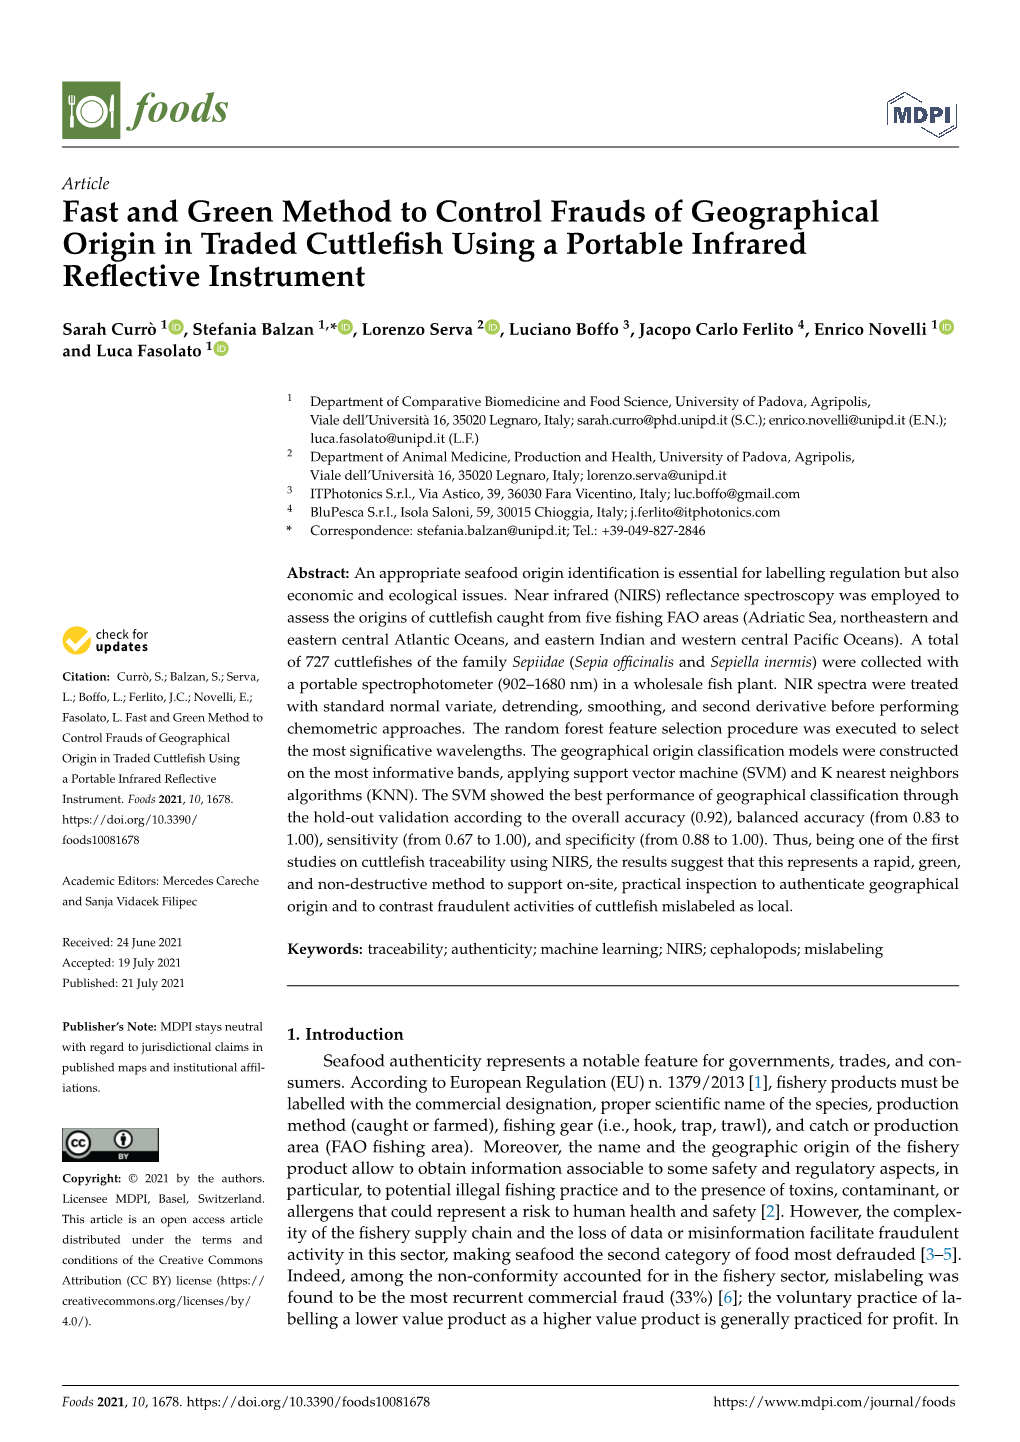 Fast and Green Method to Control Frauds of Geographical Origin in Traded Cuttleﬁsh Using a Portable Infrared Reﬂective Instrument